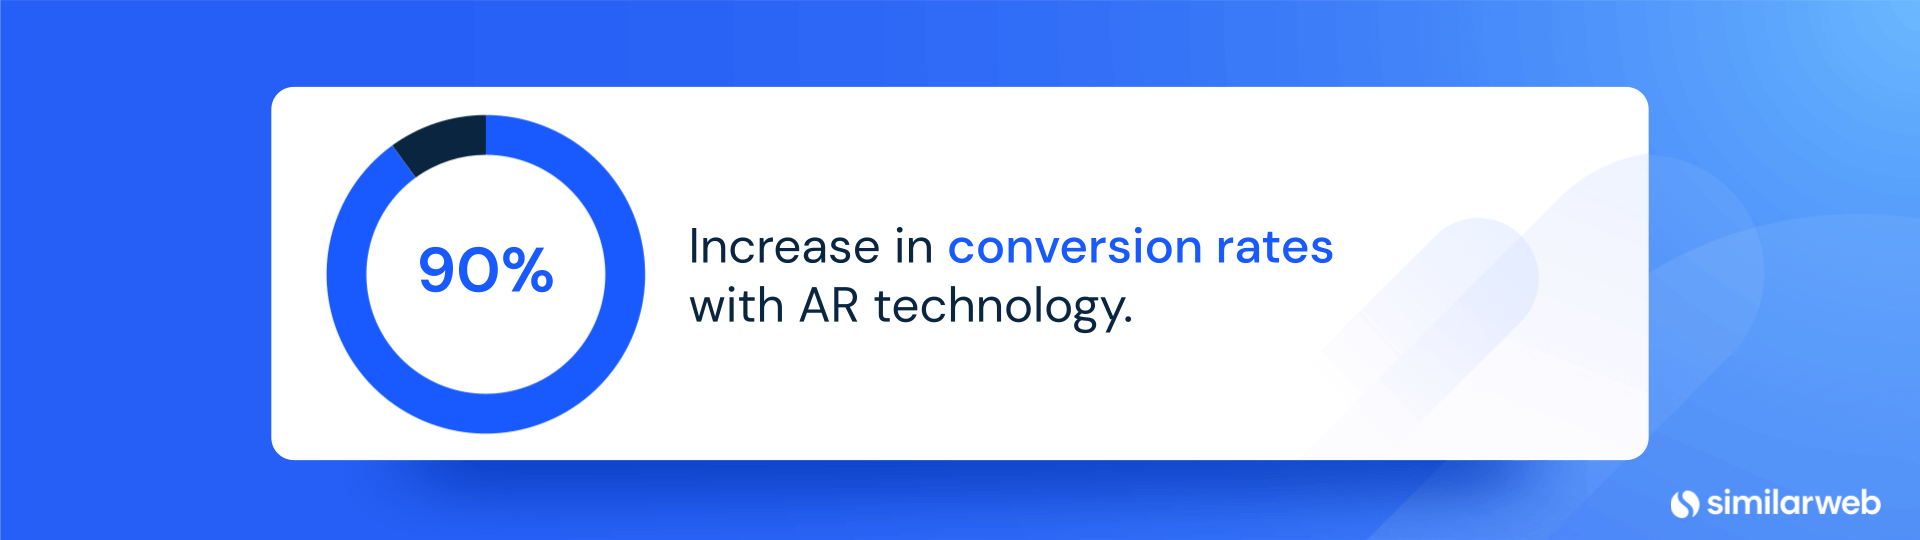 conversion rates increase by 90% with AR technology.